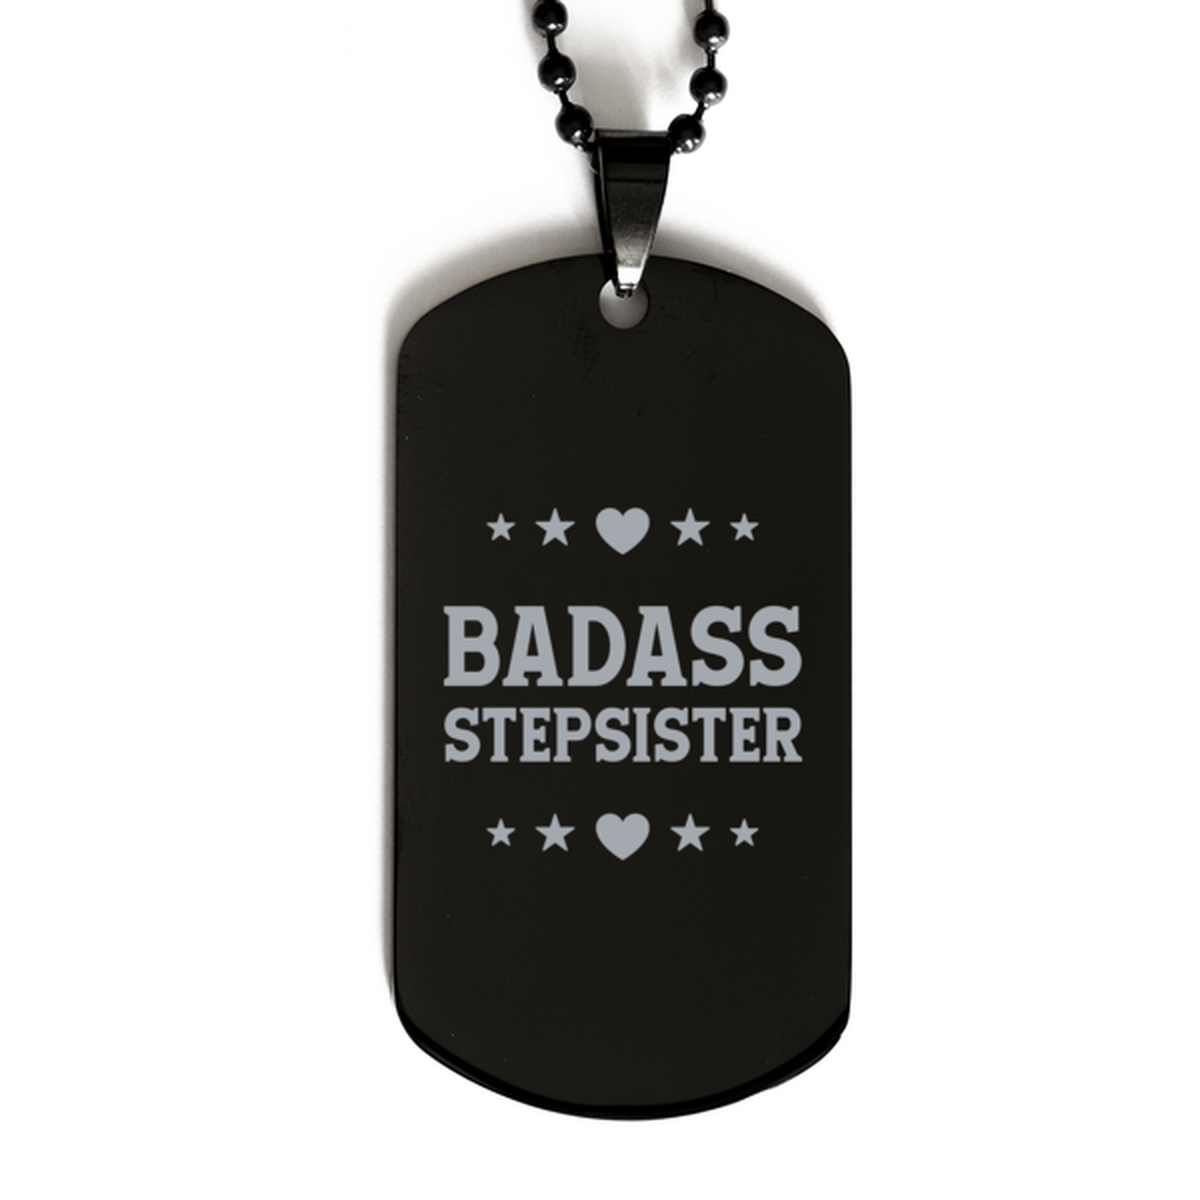 Stepsister Black Dog Tag, Badass Stepsister, Funny Family Gifts  Necklace For Stepsister From Brother Sister